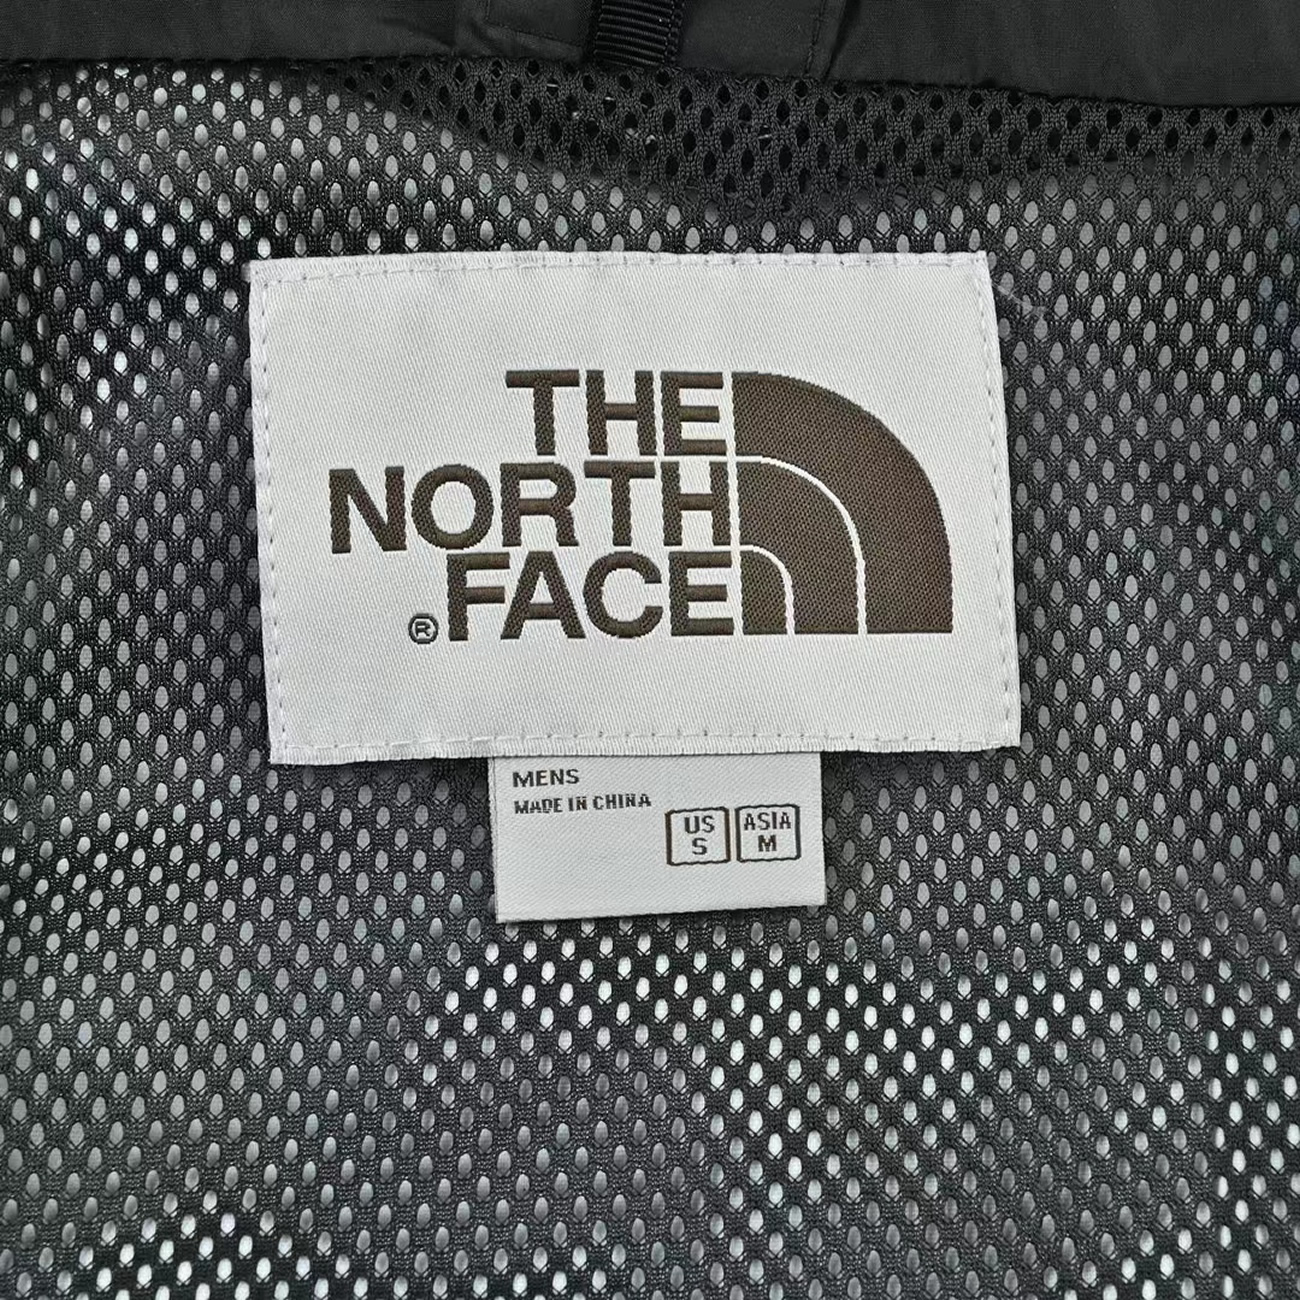 The North Face M 86 Retro Mountain Jacket Year Of The Rabbit Limited (4) - newkick.org